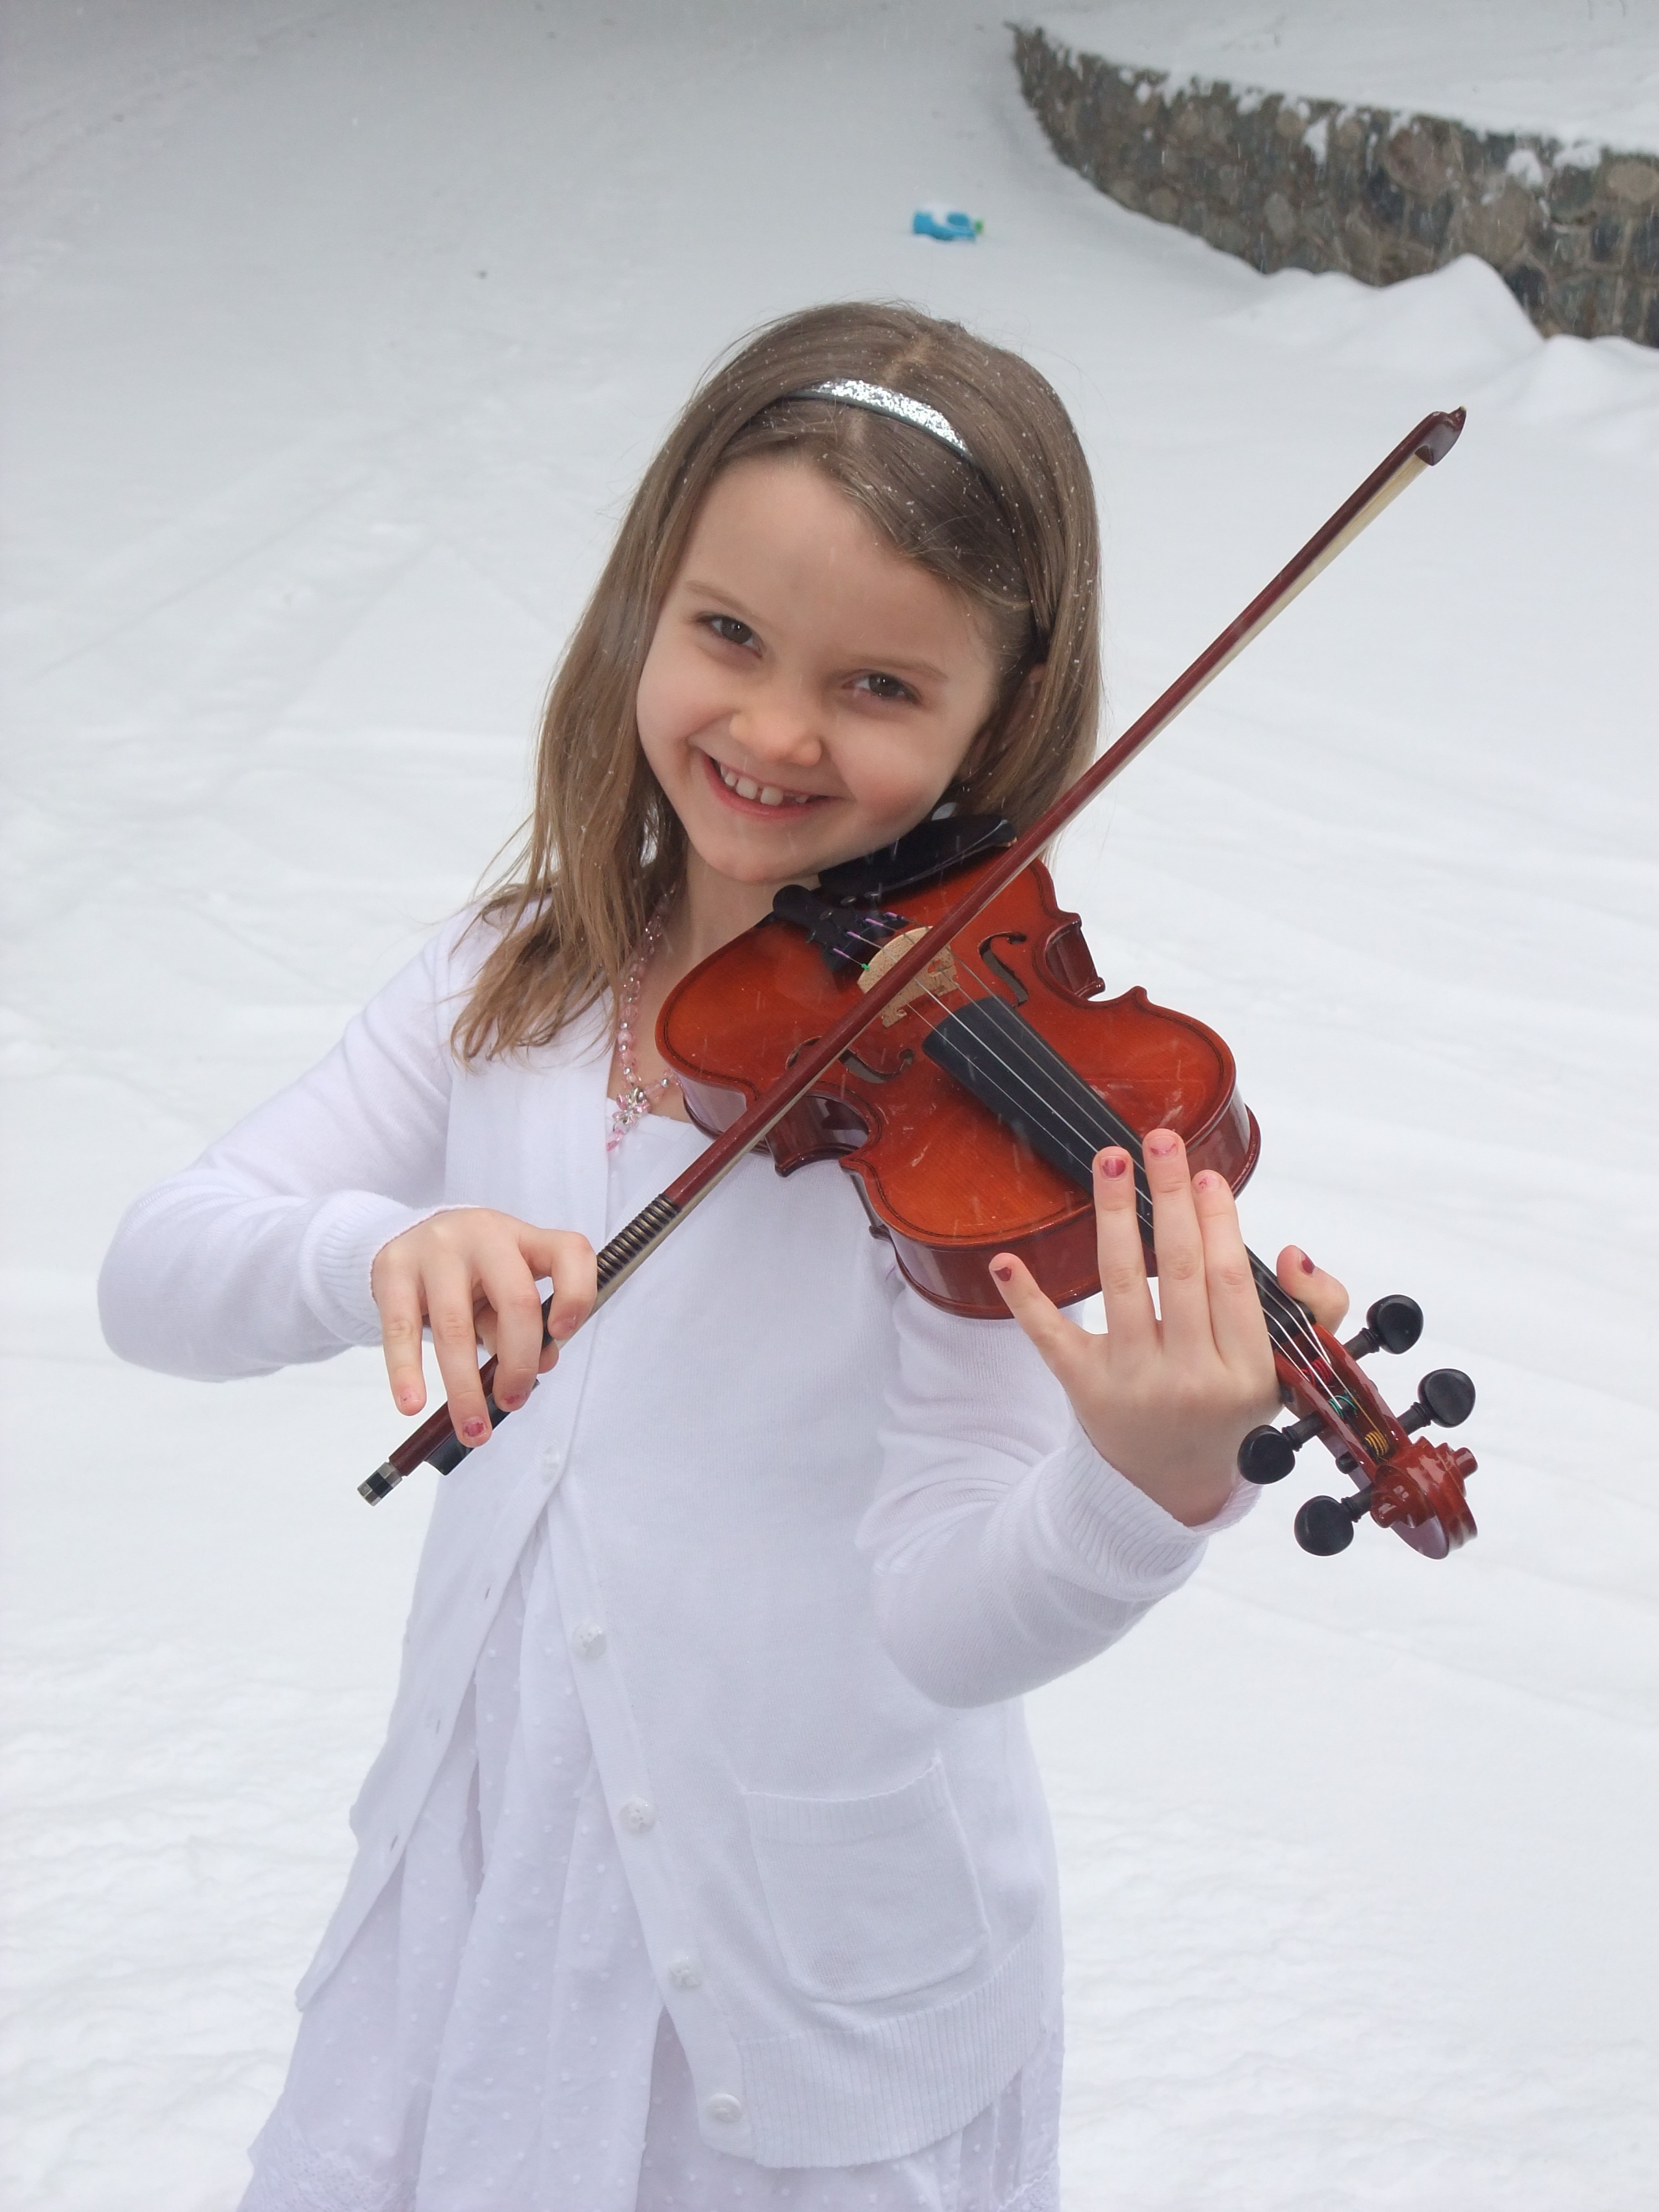 Madelyn playing violin outside in winter